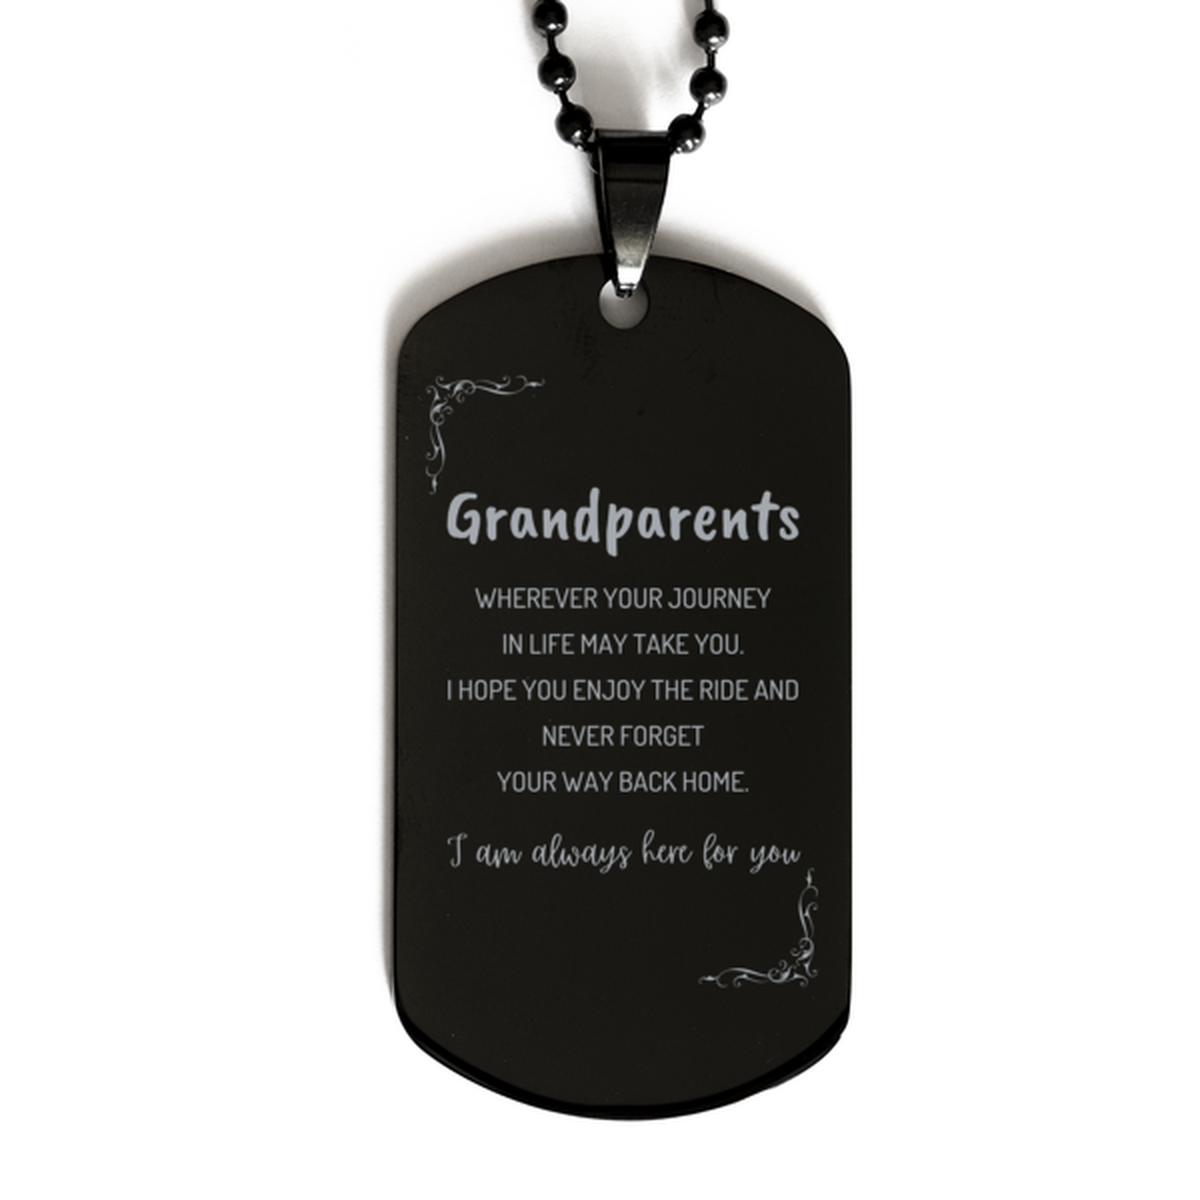 Grandparents wherever your journey in life may take you, I am always here for you Grandparents Black Dog Tag, Awesome Christmas Gifts For Grandparents, Grandparents Birthday Gifts for Men Women Family Loved One